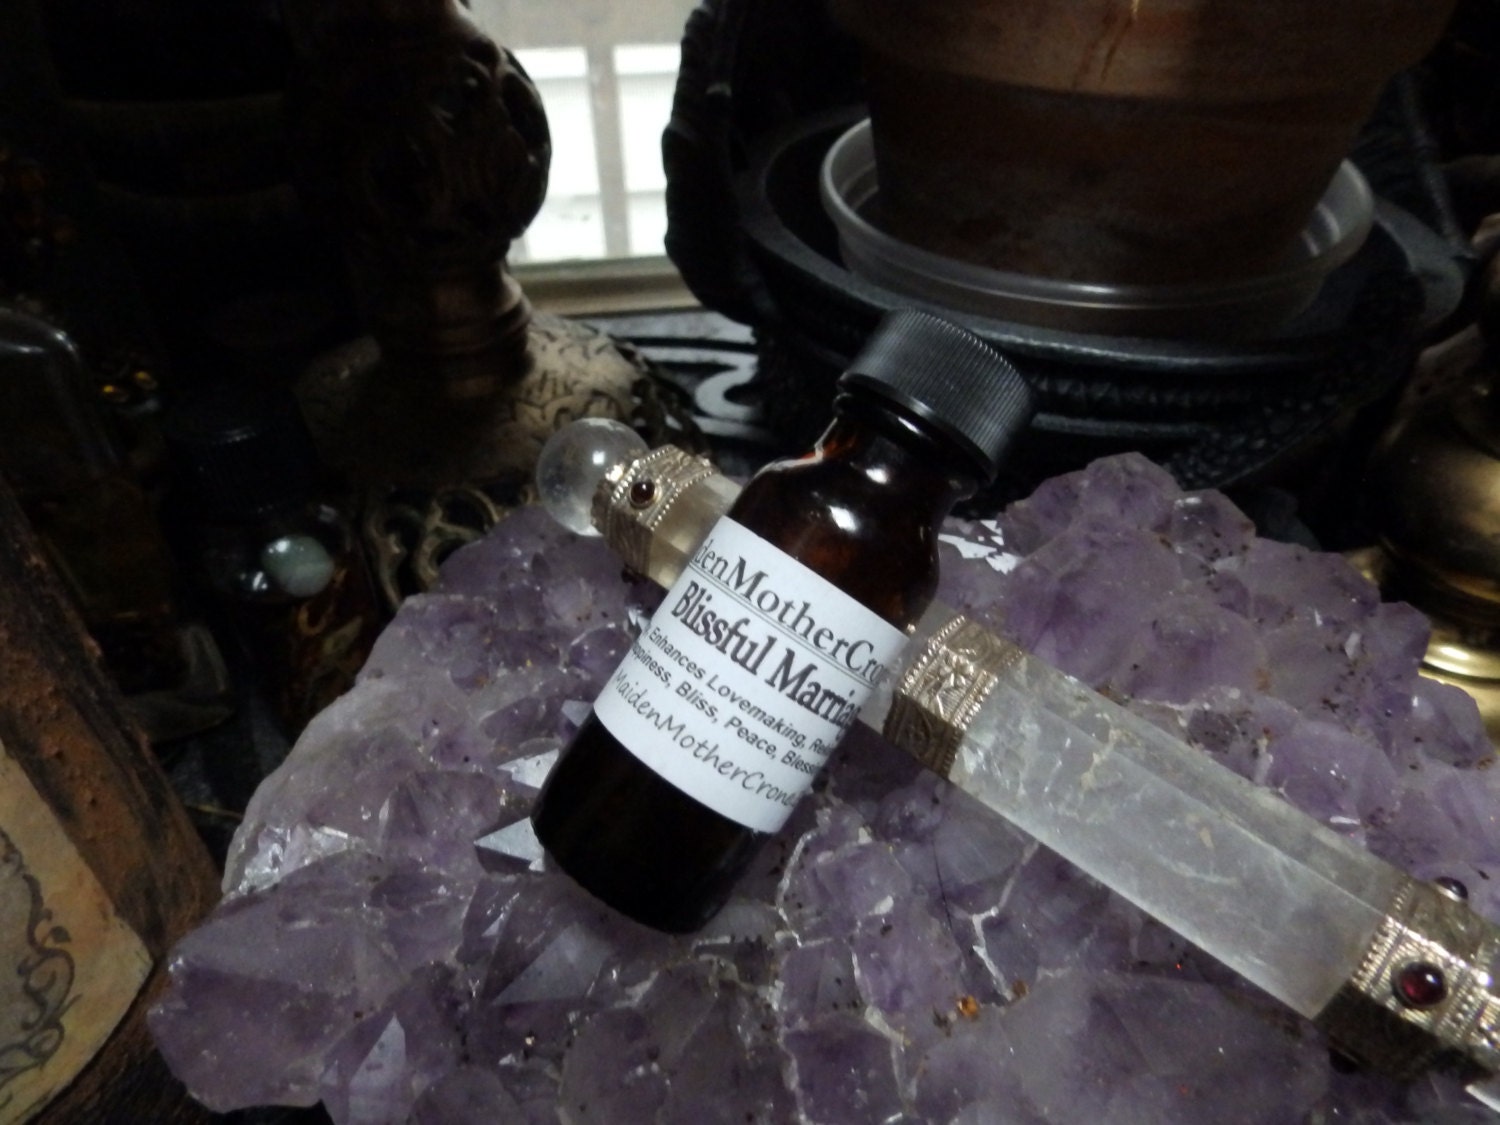 Marriage Bliss Oil Wicca Pagan Spirituality Religion